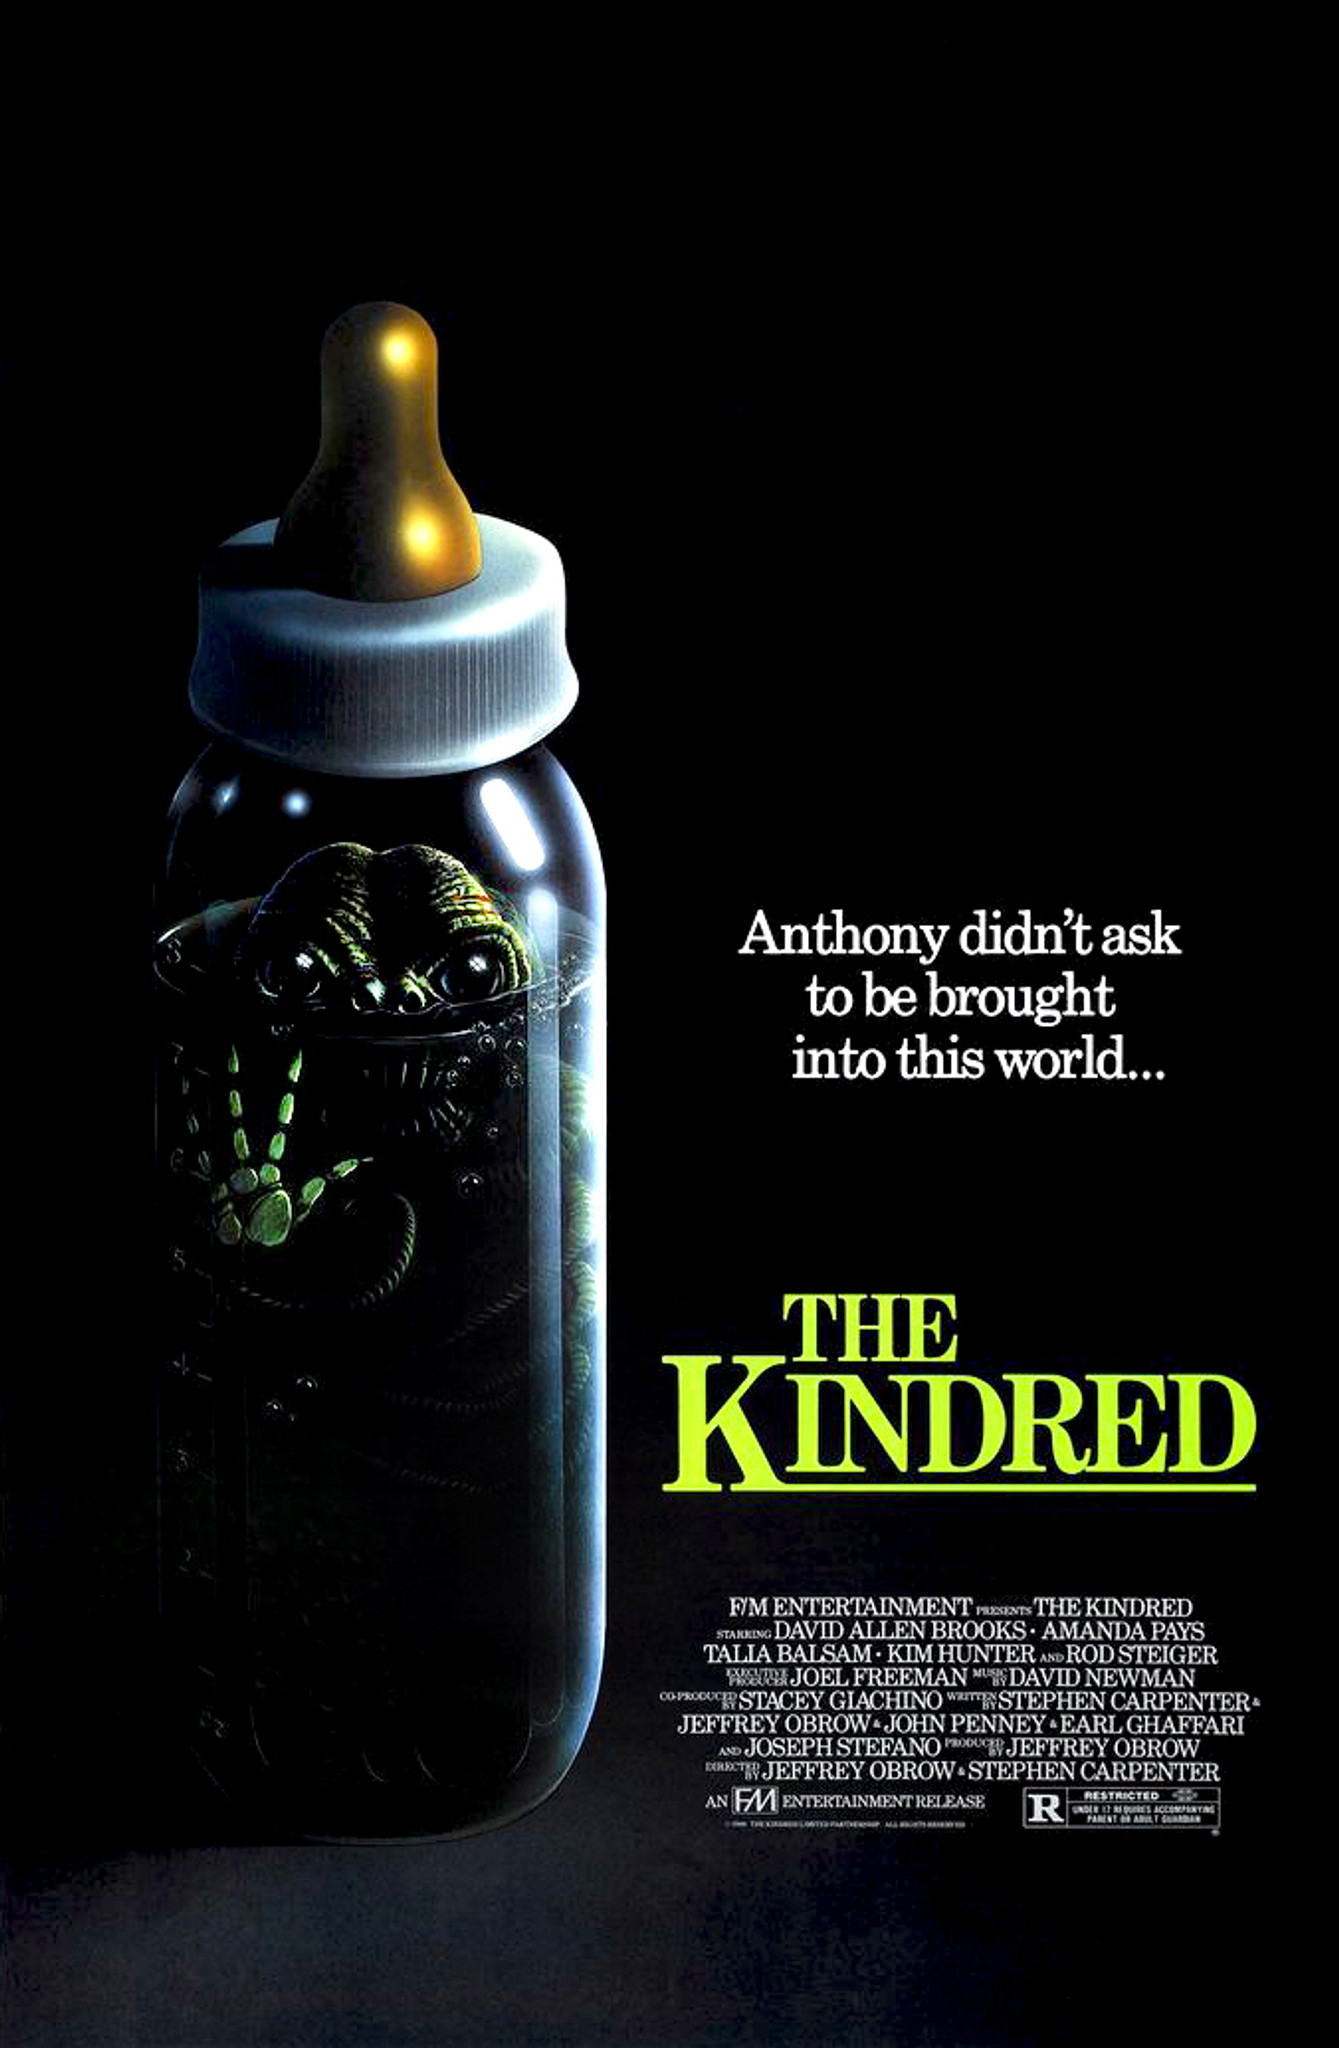 The Kindred- DVD-Blu-ray Review